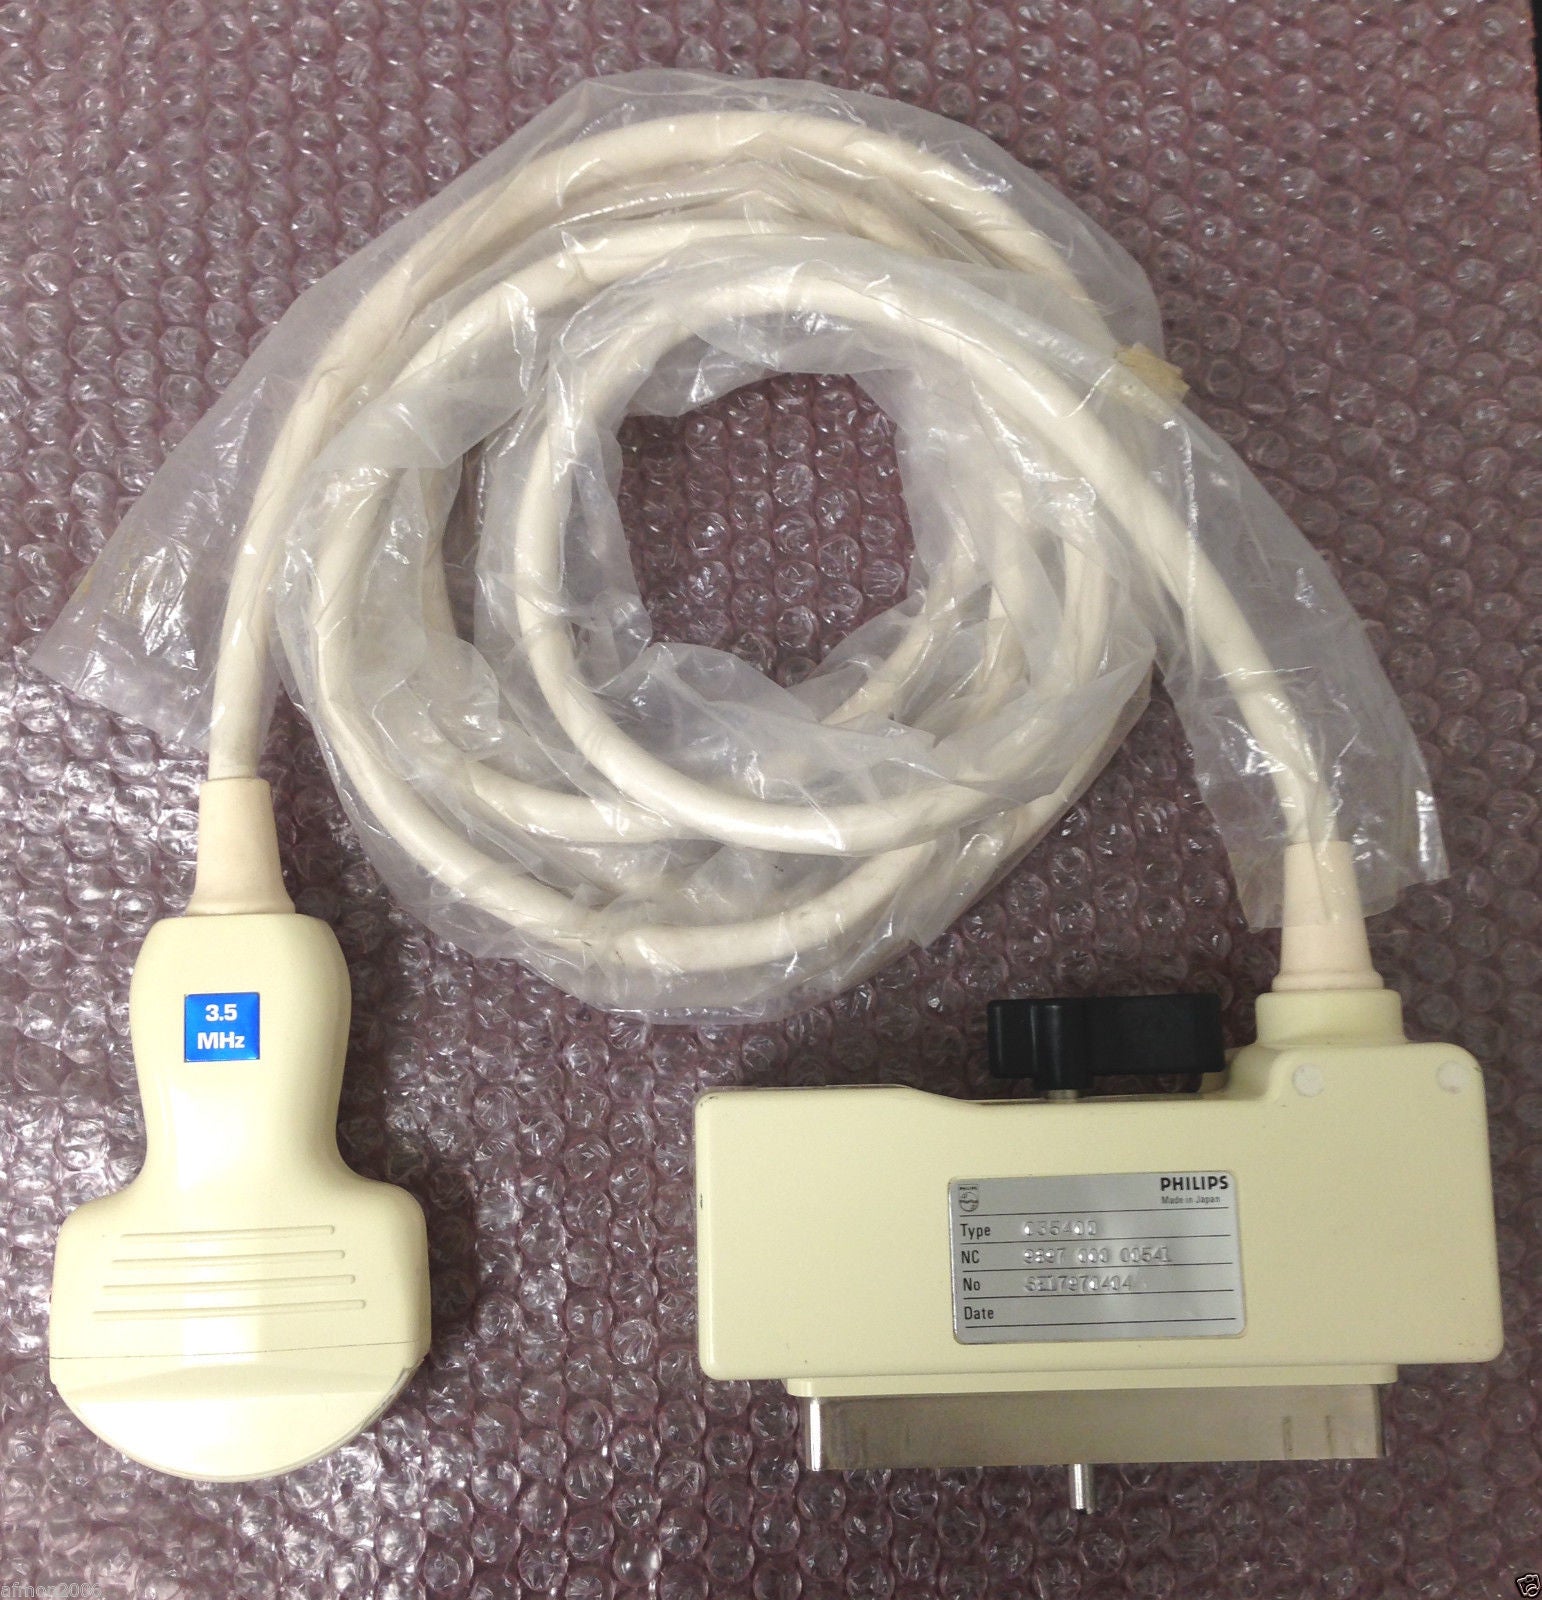 Philips C3540 D 3.5MHz Curved Ultrasound Transducer Probe SE17970404A HP C3540D